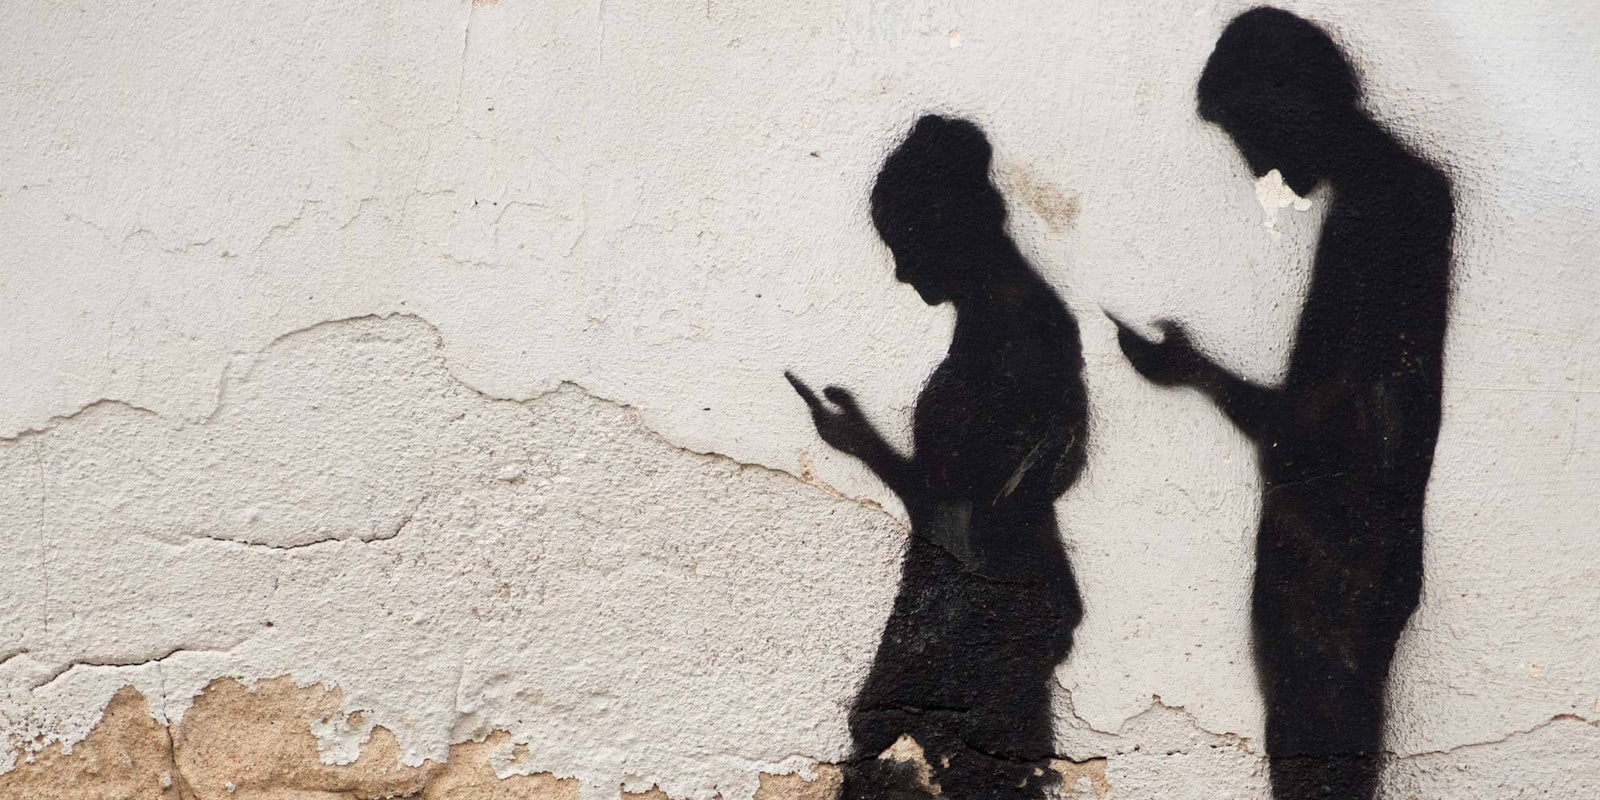 Shadows of people looking at their phone against a wall